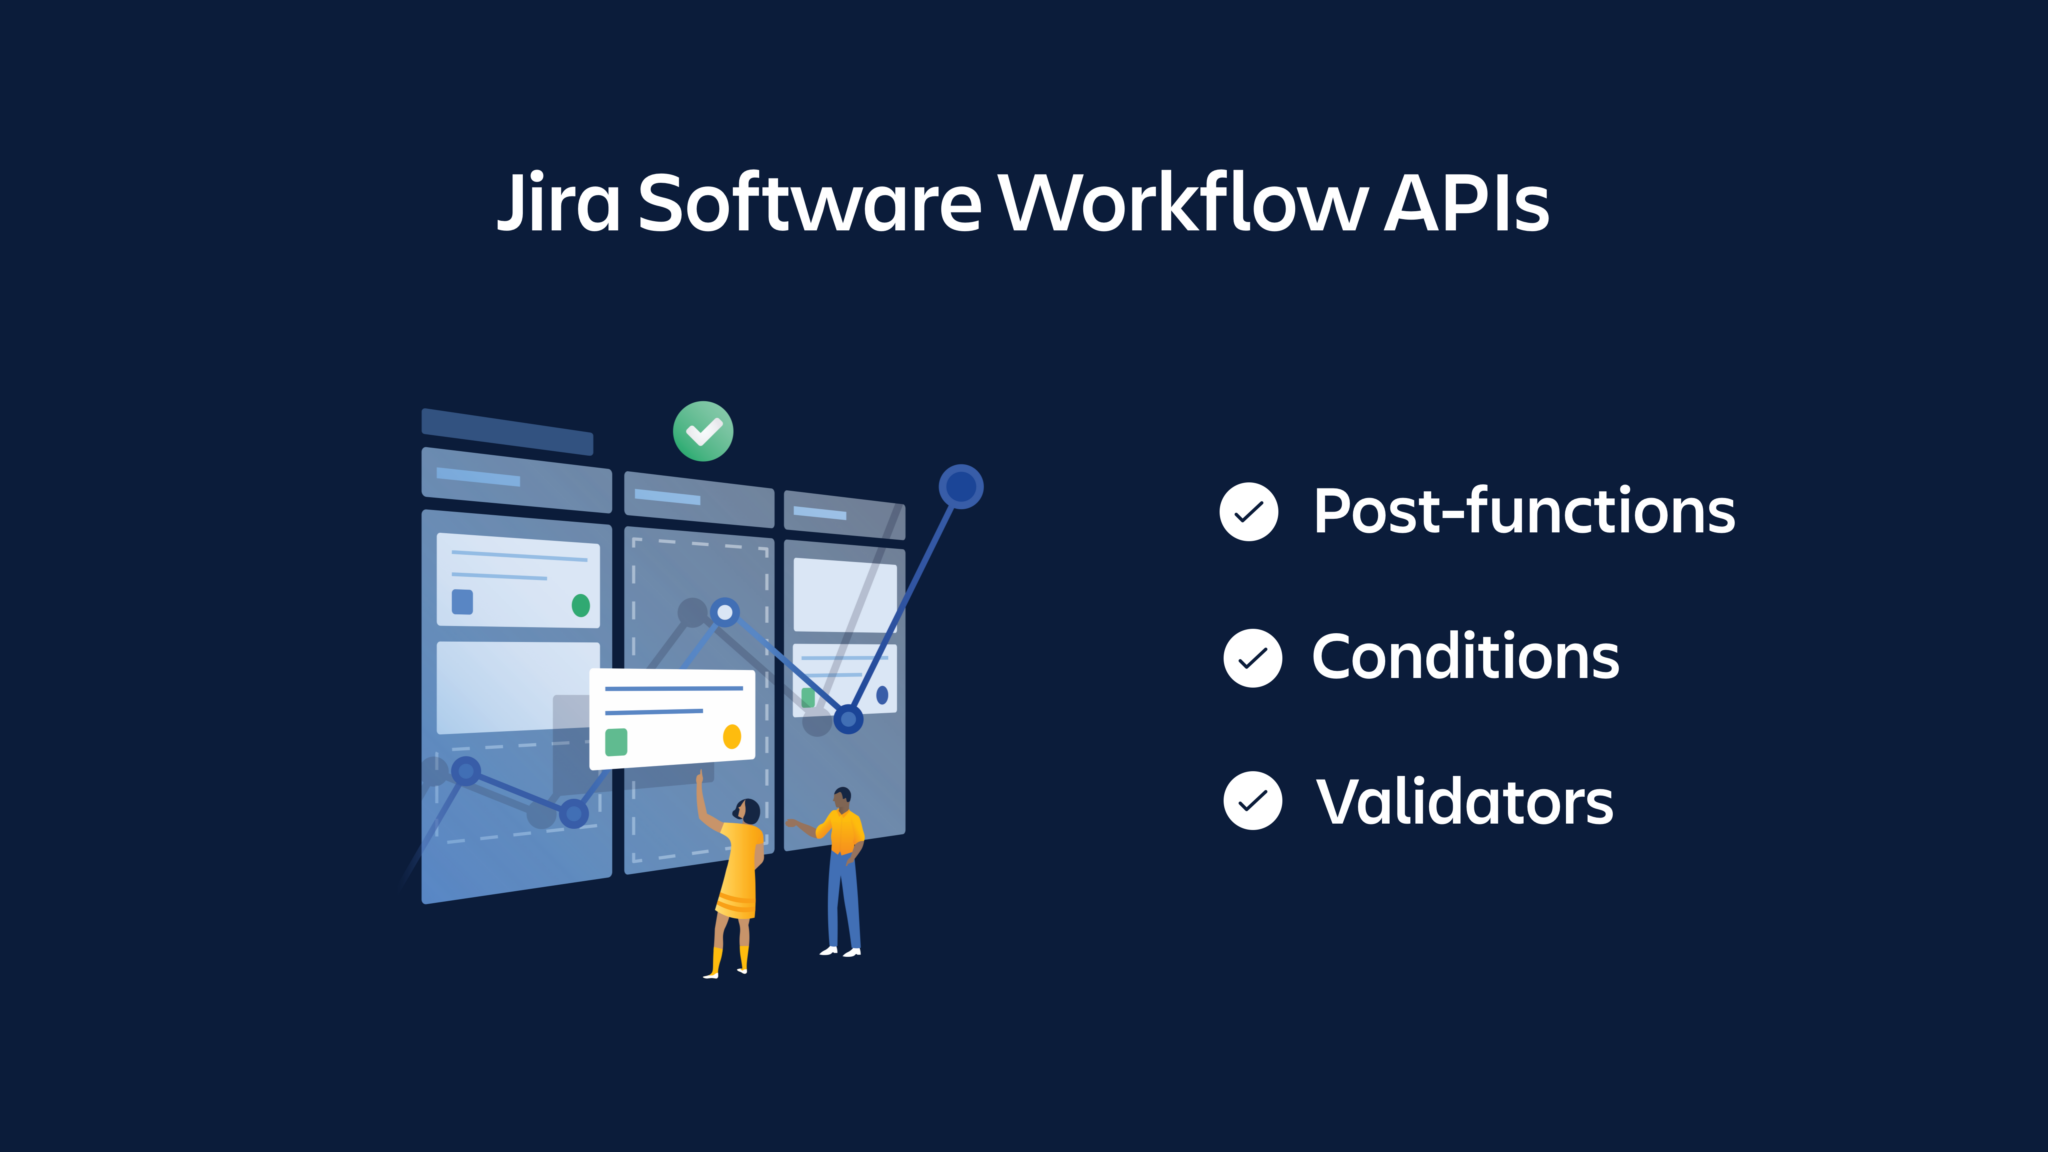 A slide showing the new modules available in the Jira Software Cloud workflow APIs